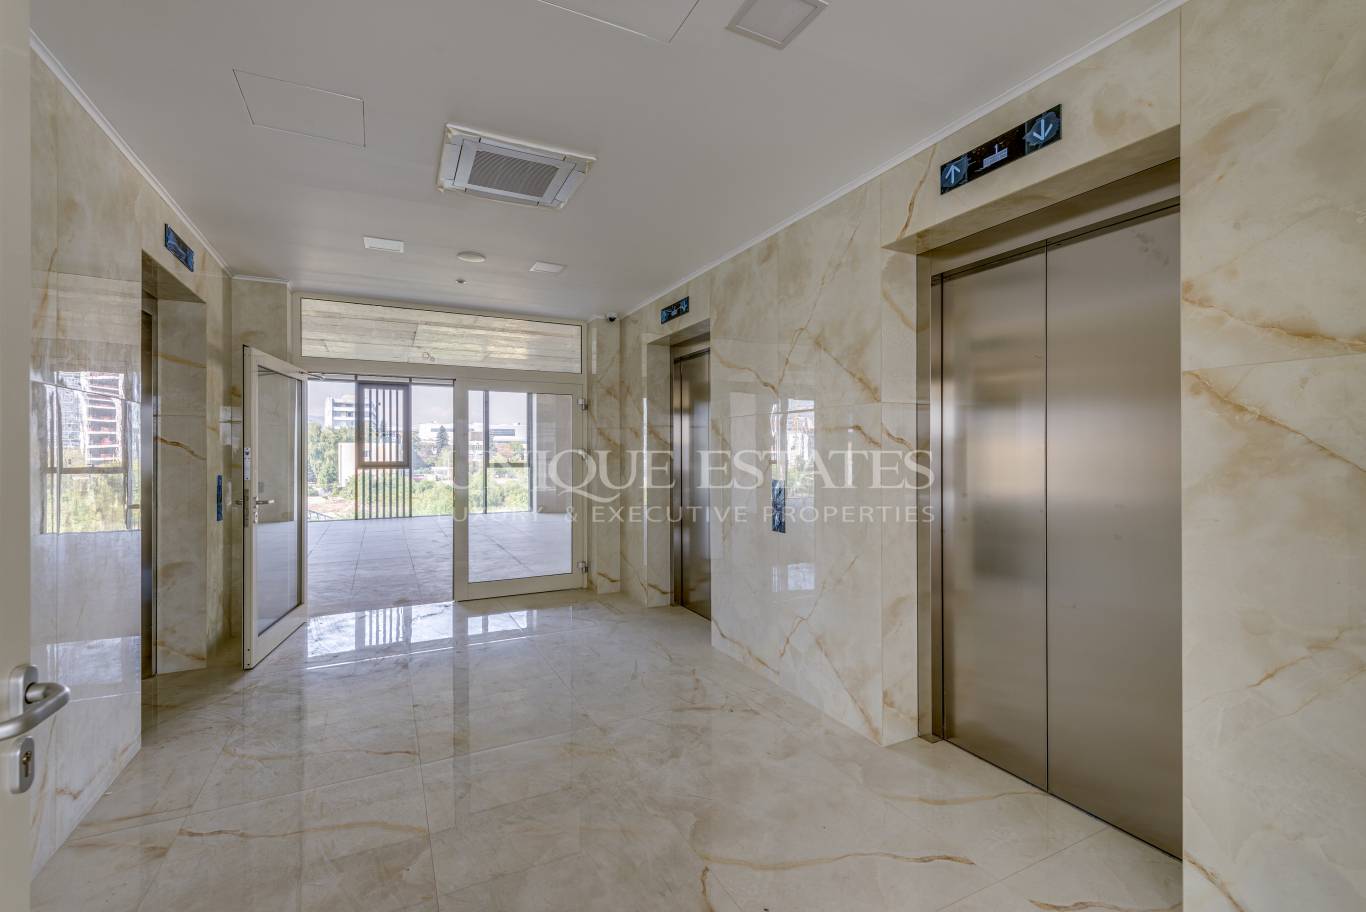 Office for sale in Sofia, Lozenets with listing ID: K14348 - image 4